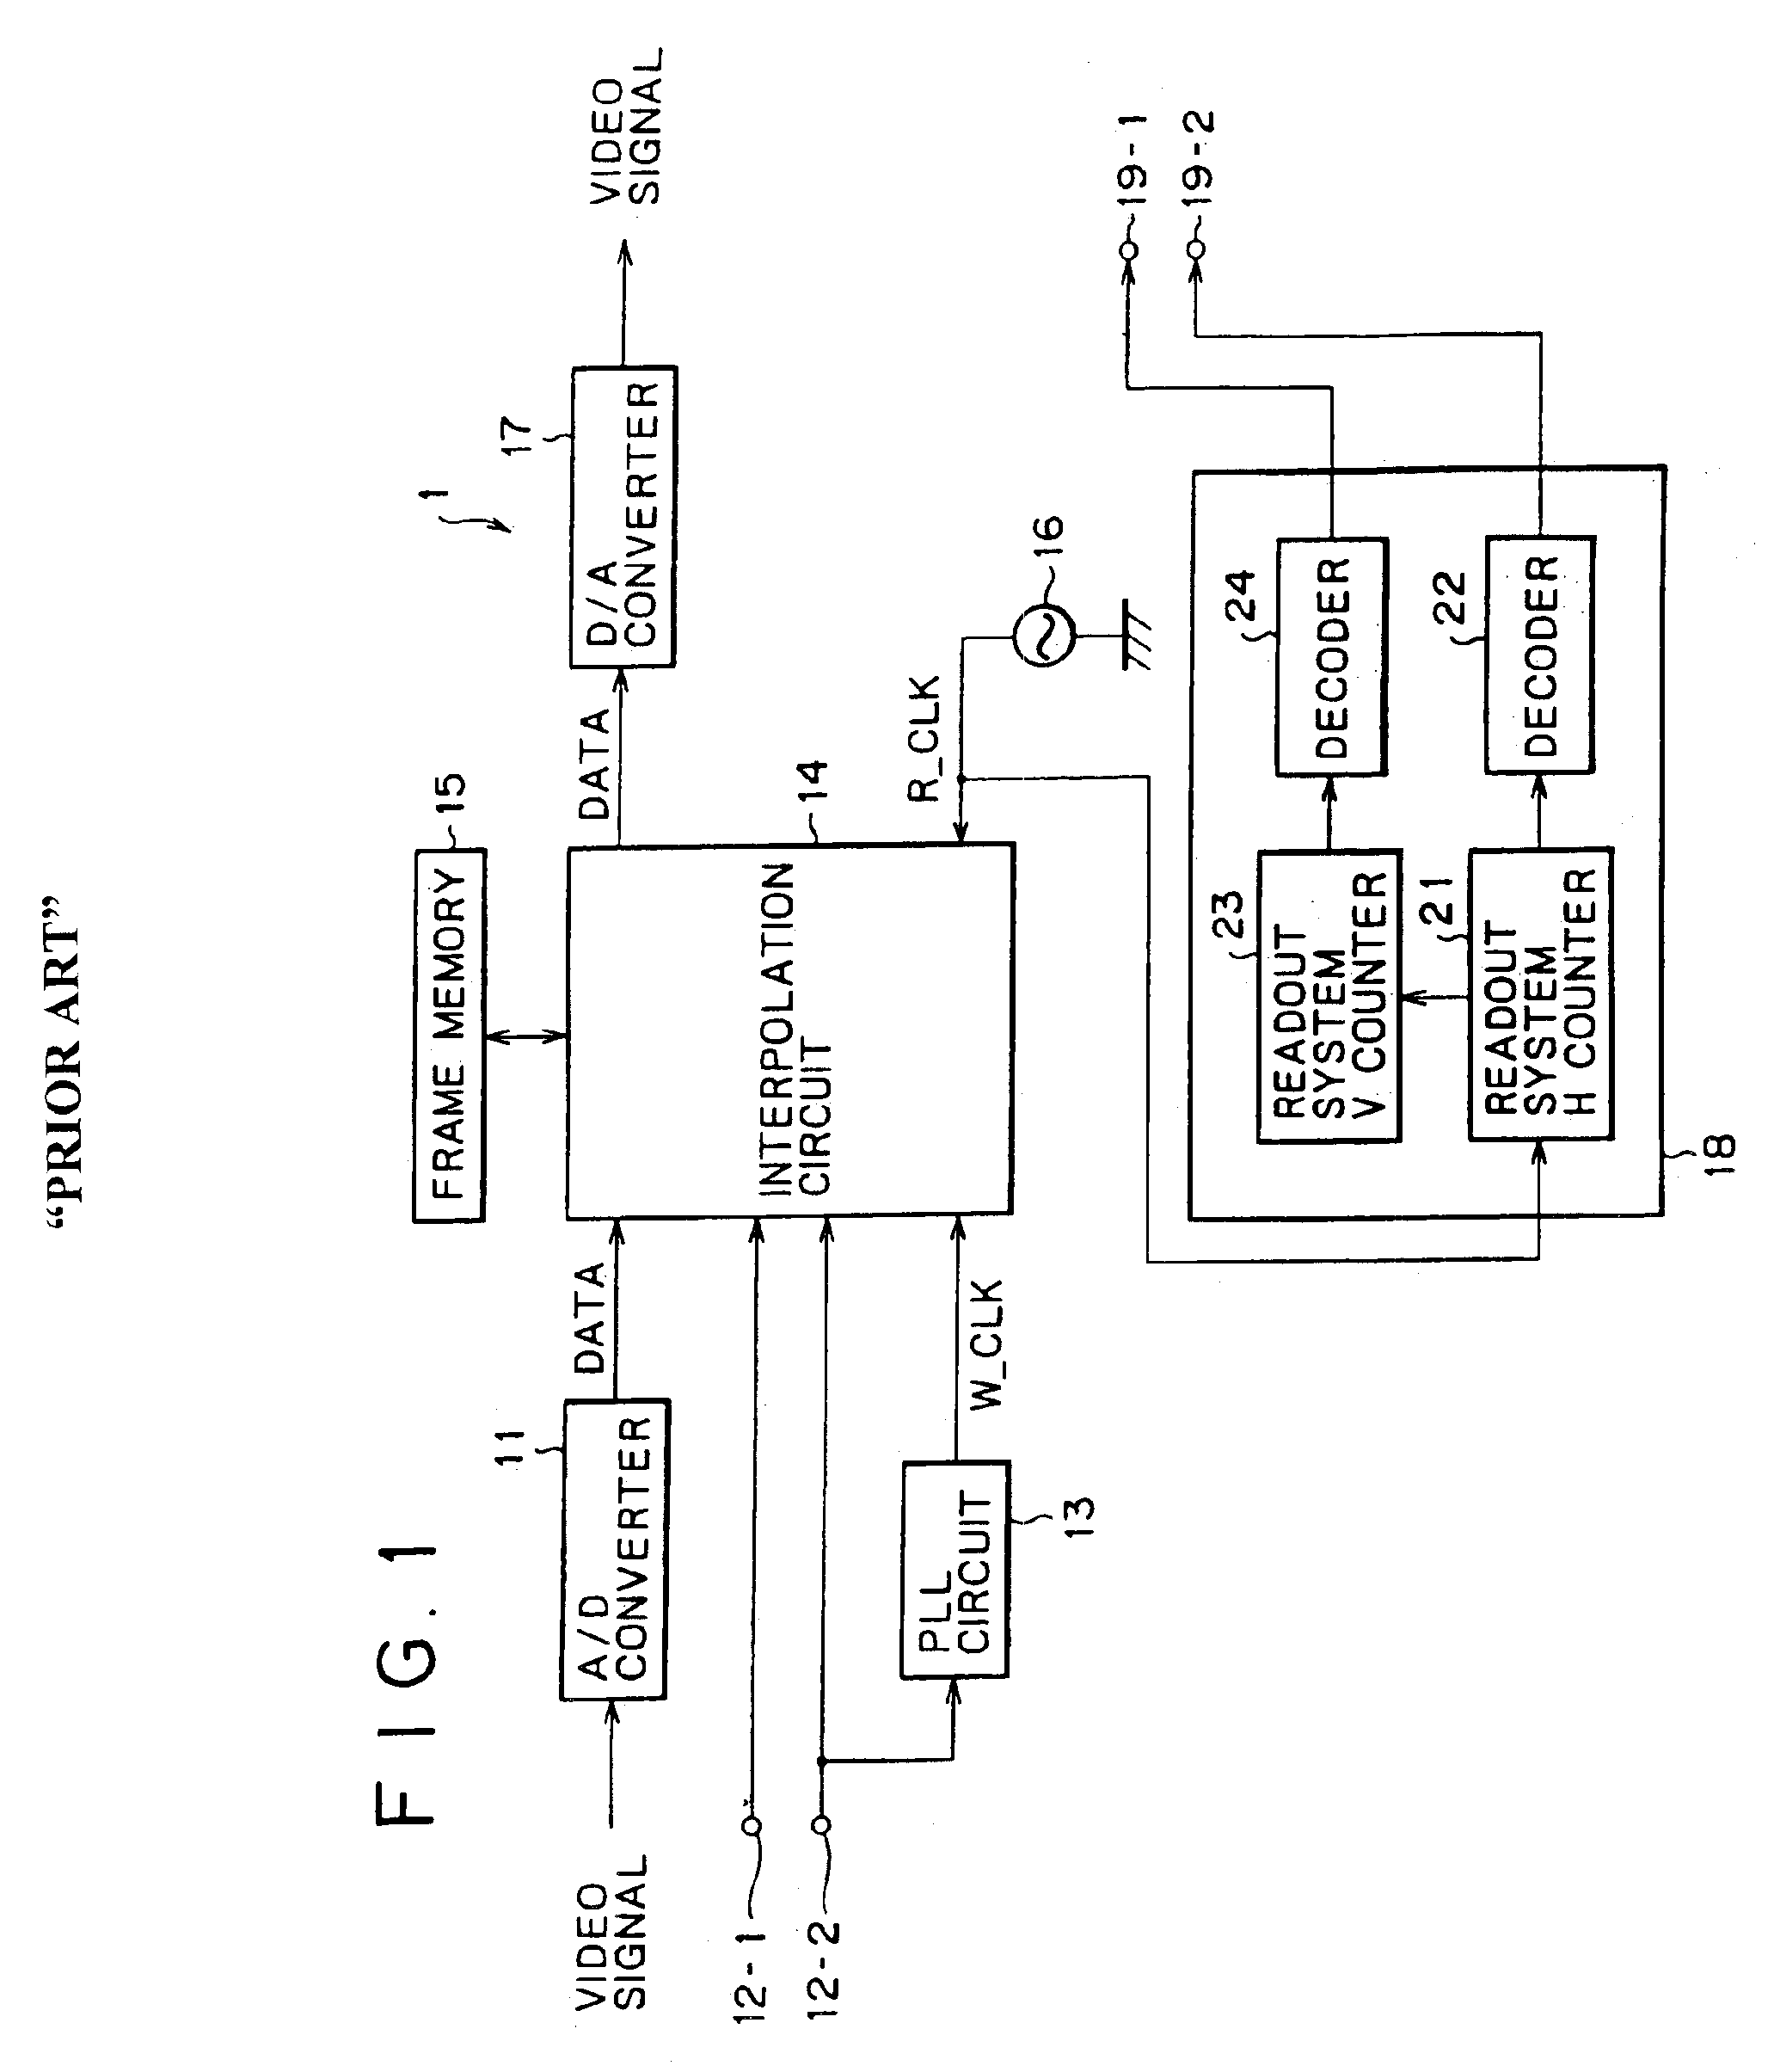 Video signal conversion processing apparatus and method